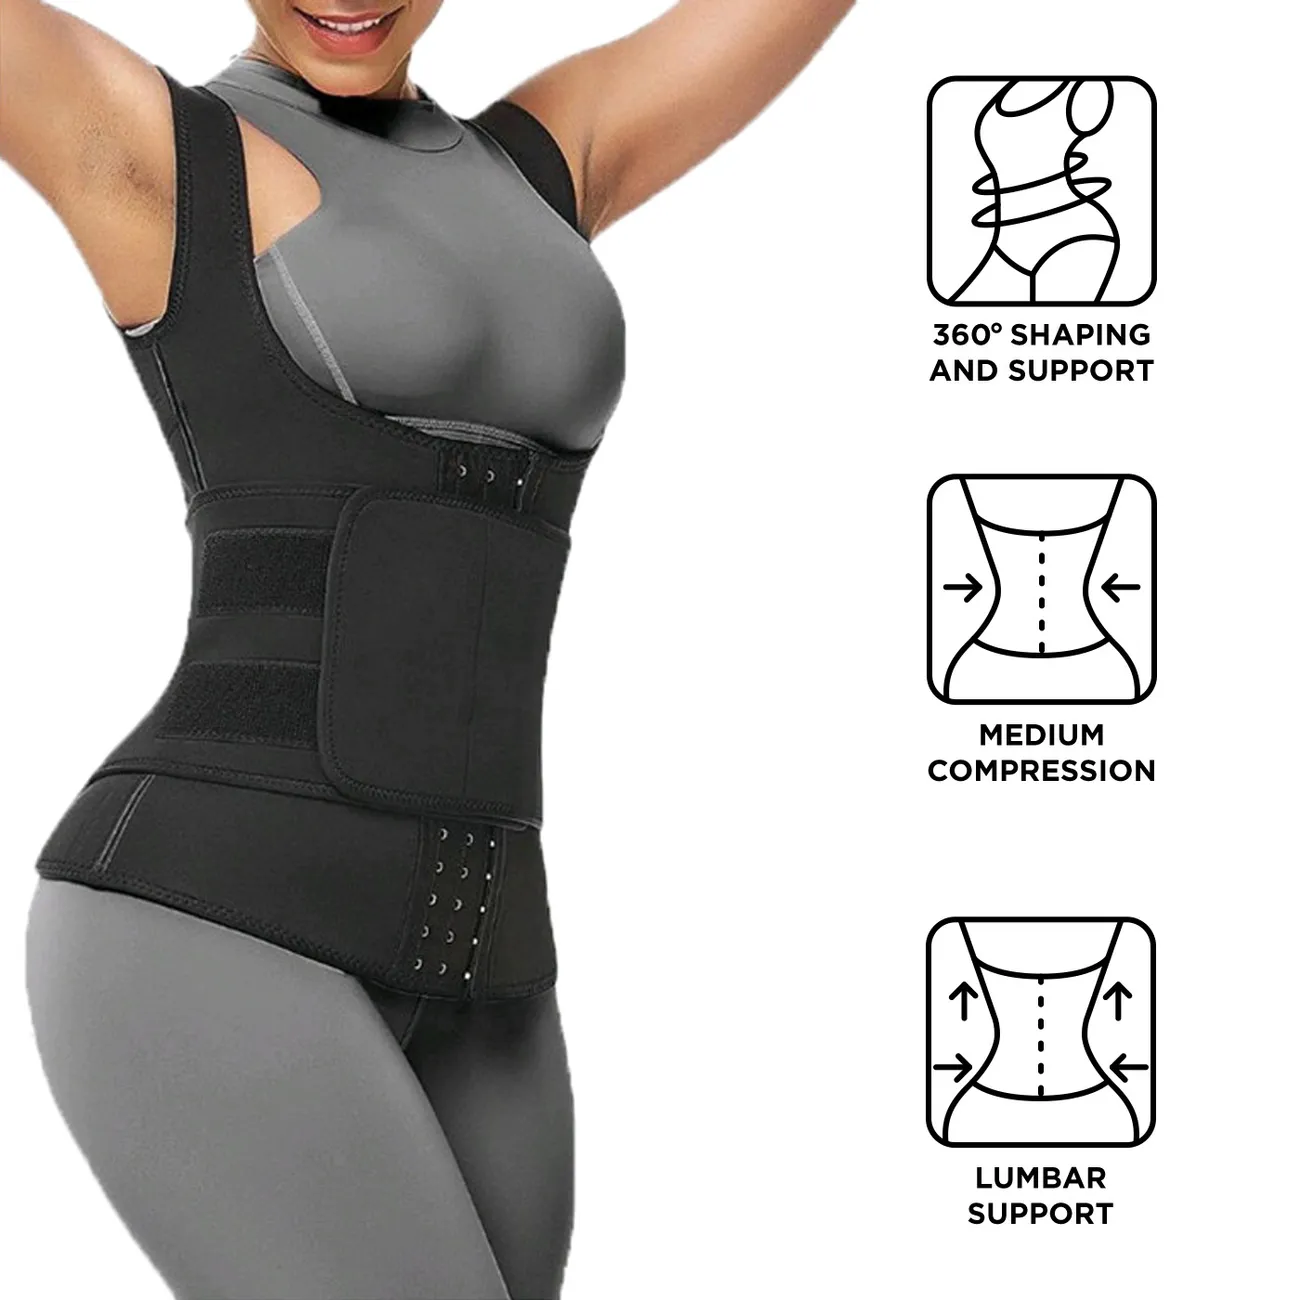 Womens Shapewear Weight Loss Waist Trainer Corset Tank Top Vest Sport  Workout Slimming Body Shaper Only د.ب.‏ 4.90 بات بات Mobile